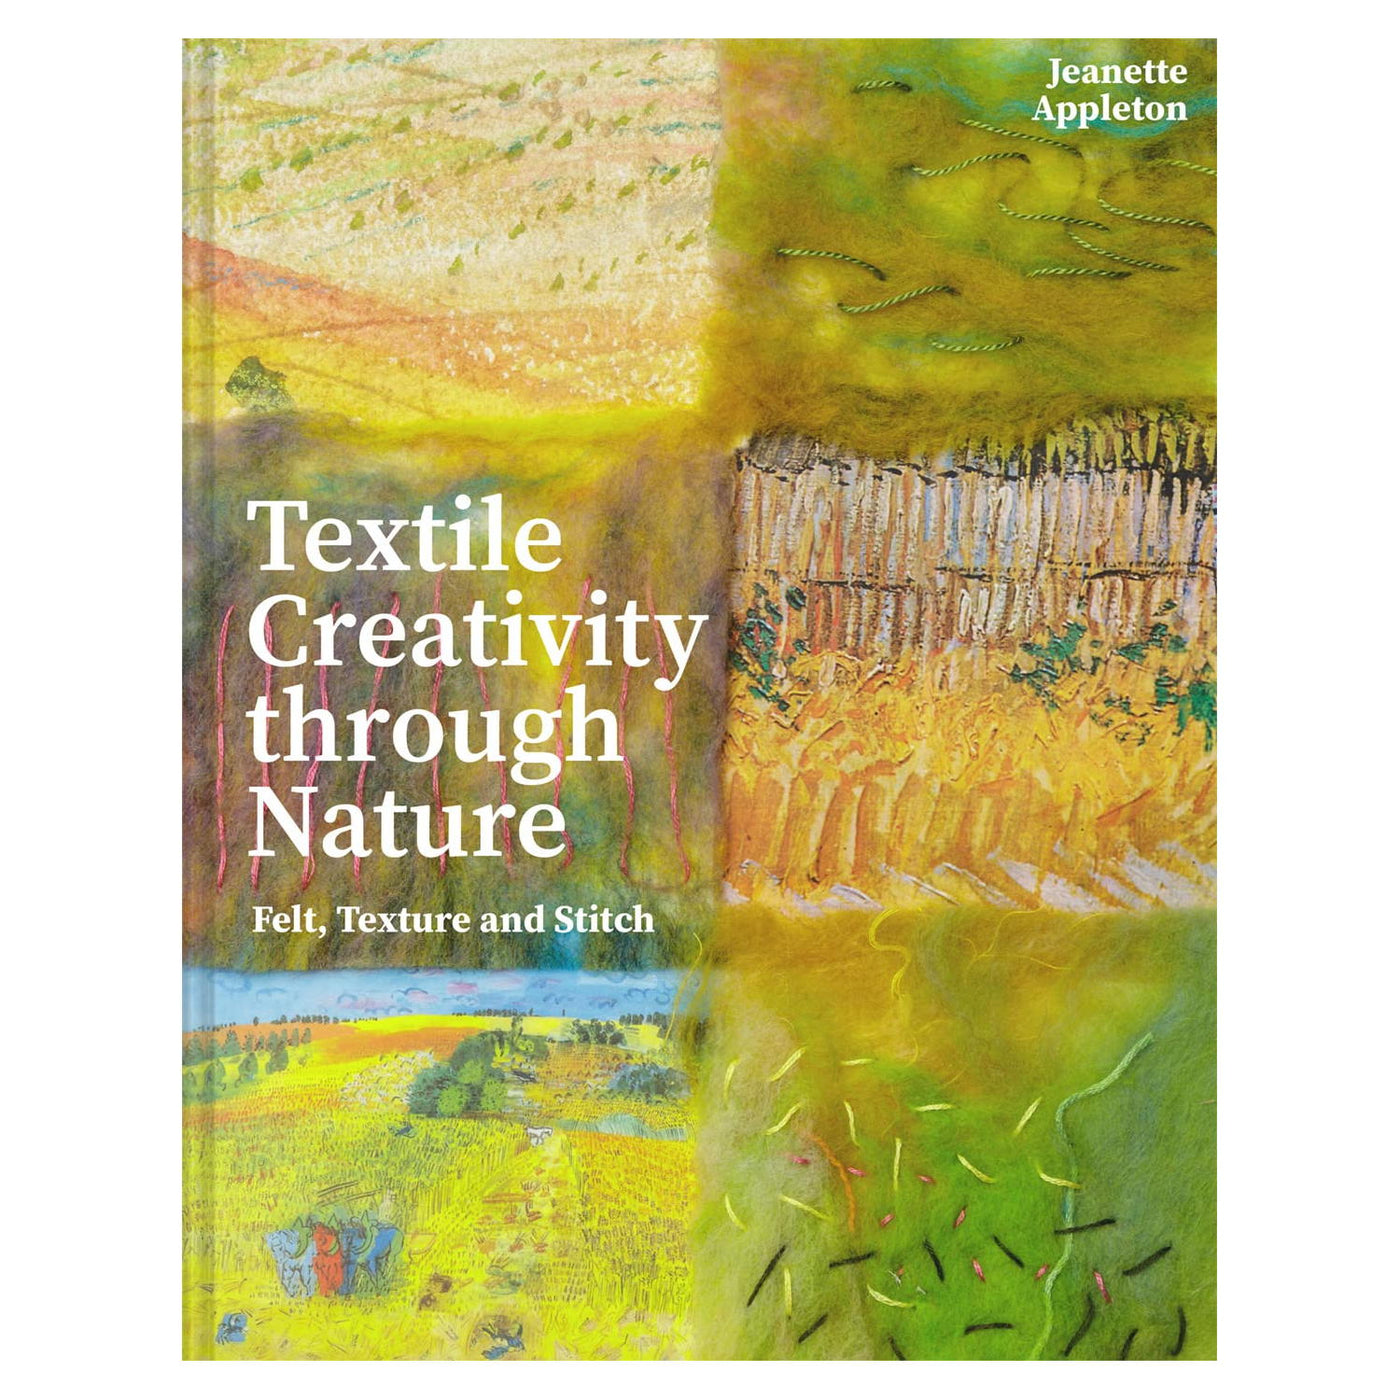 Textile Creativity through Nature Book by Jeanette Appleton